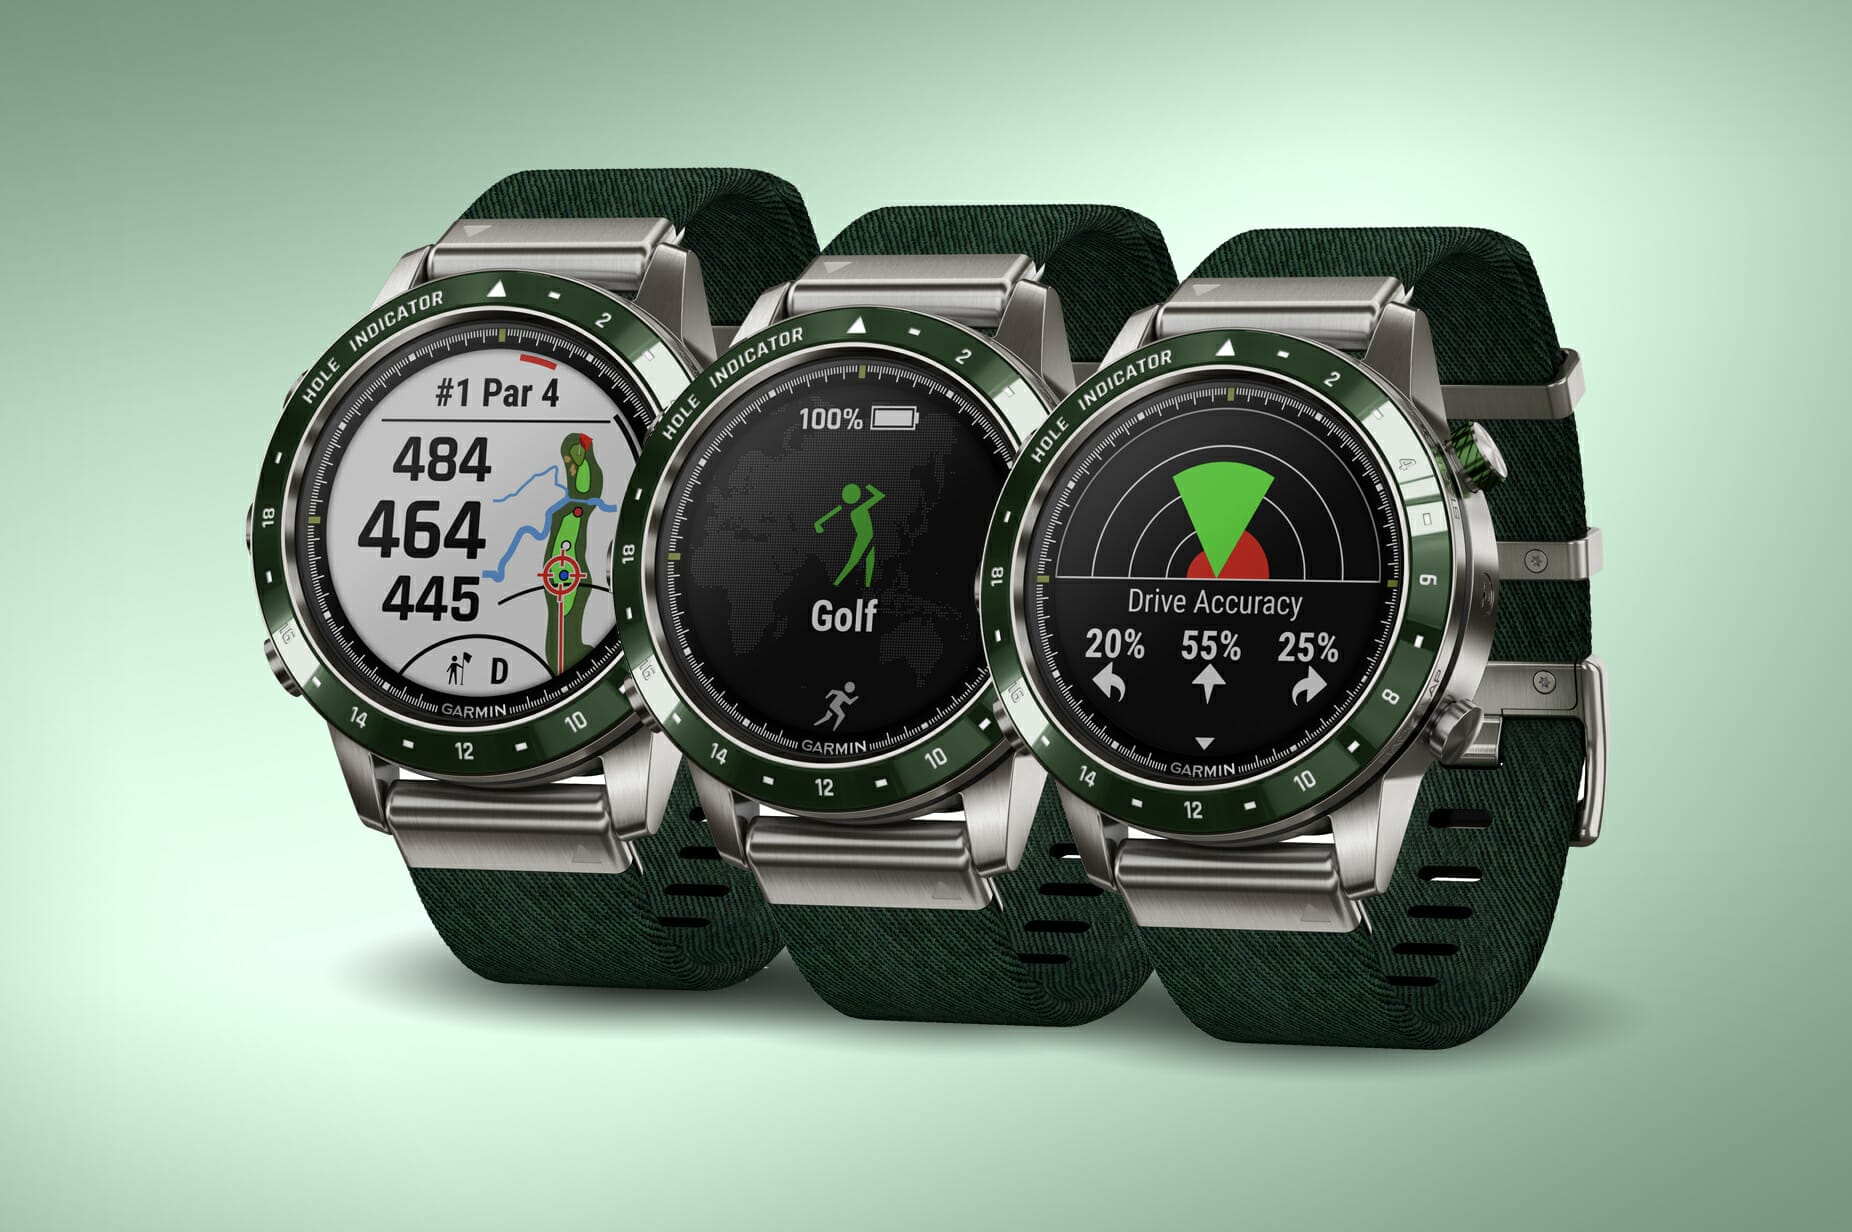 Style, comfort and functionality, the MARQ Golfer from Garmin